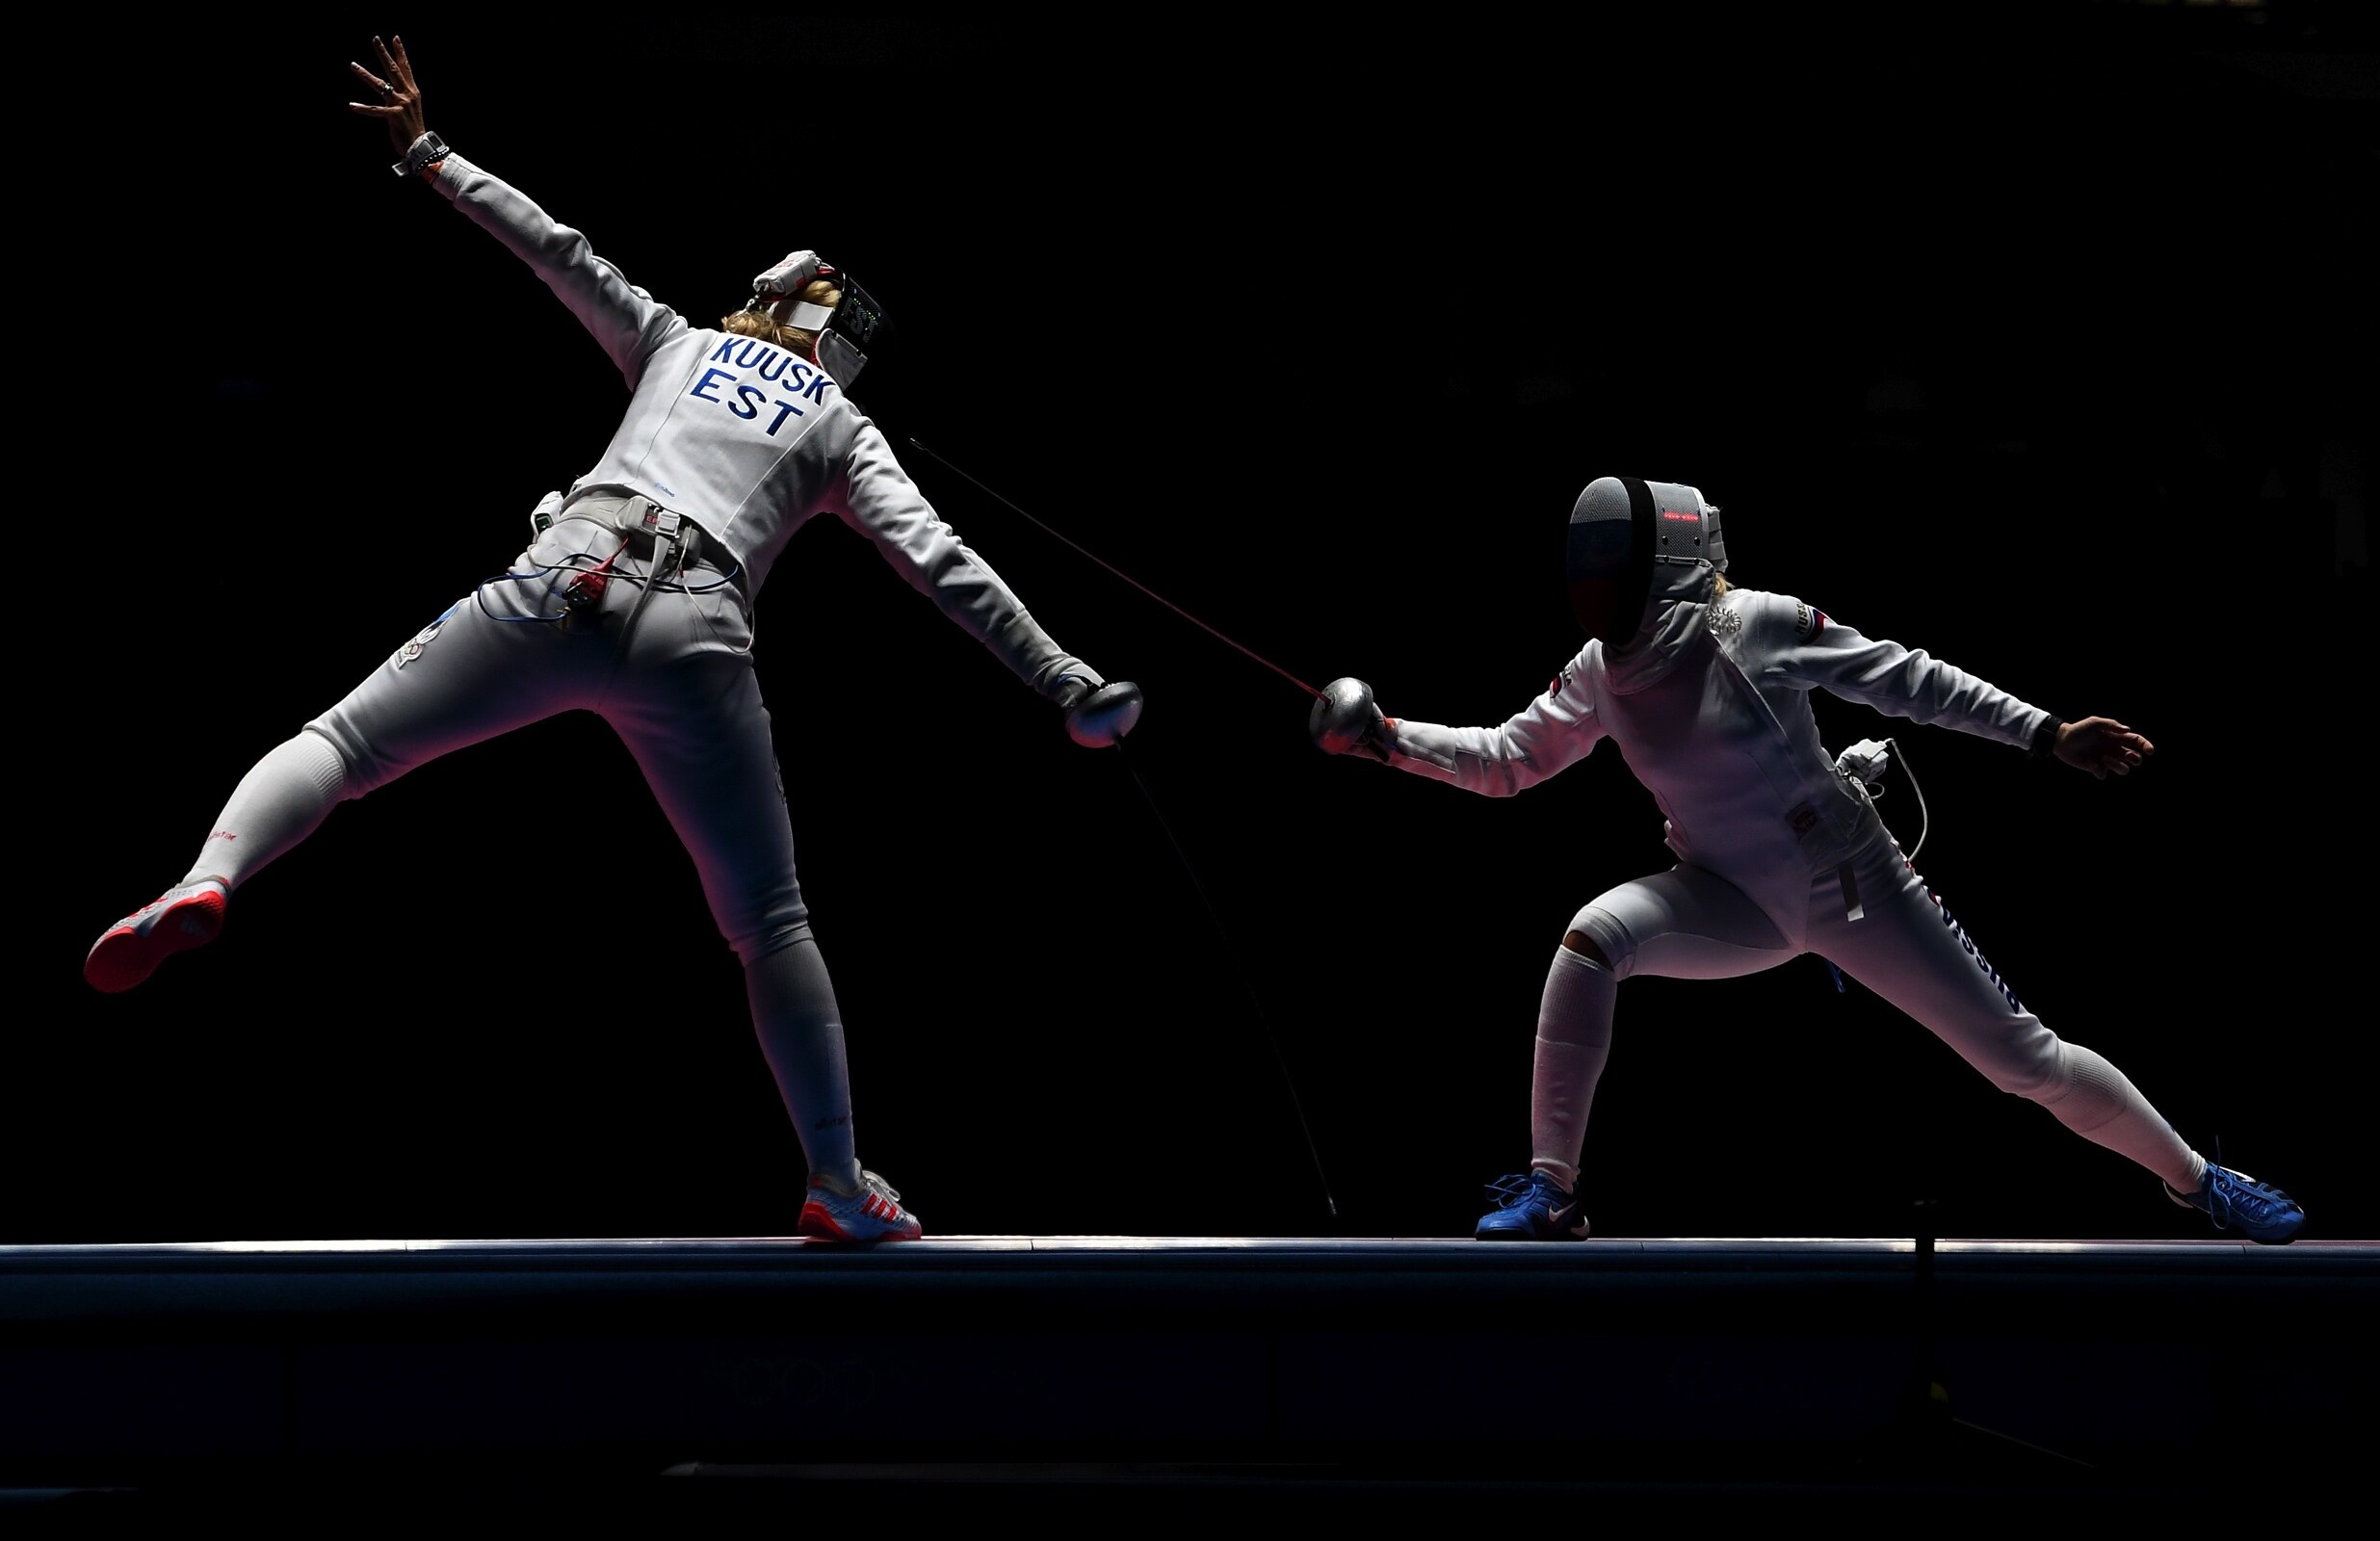 Fencing: Kristina Kuusk, An Estonian epee fencer, The 2013 and the 2016 European Fencing Championships gold medalist. 2480x1600 HD Background.